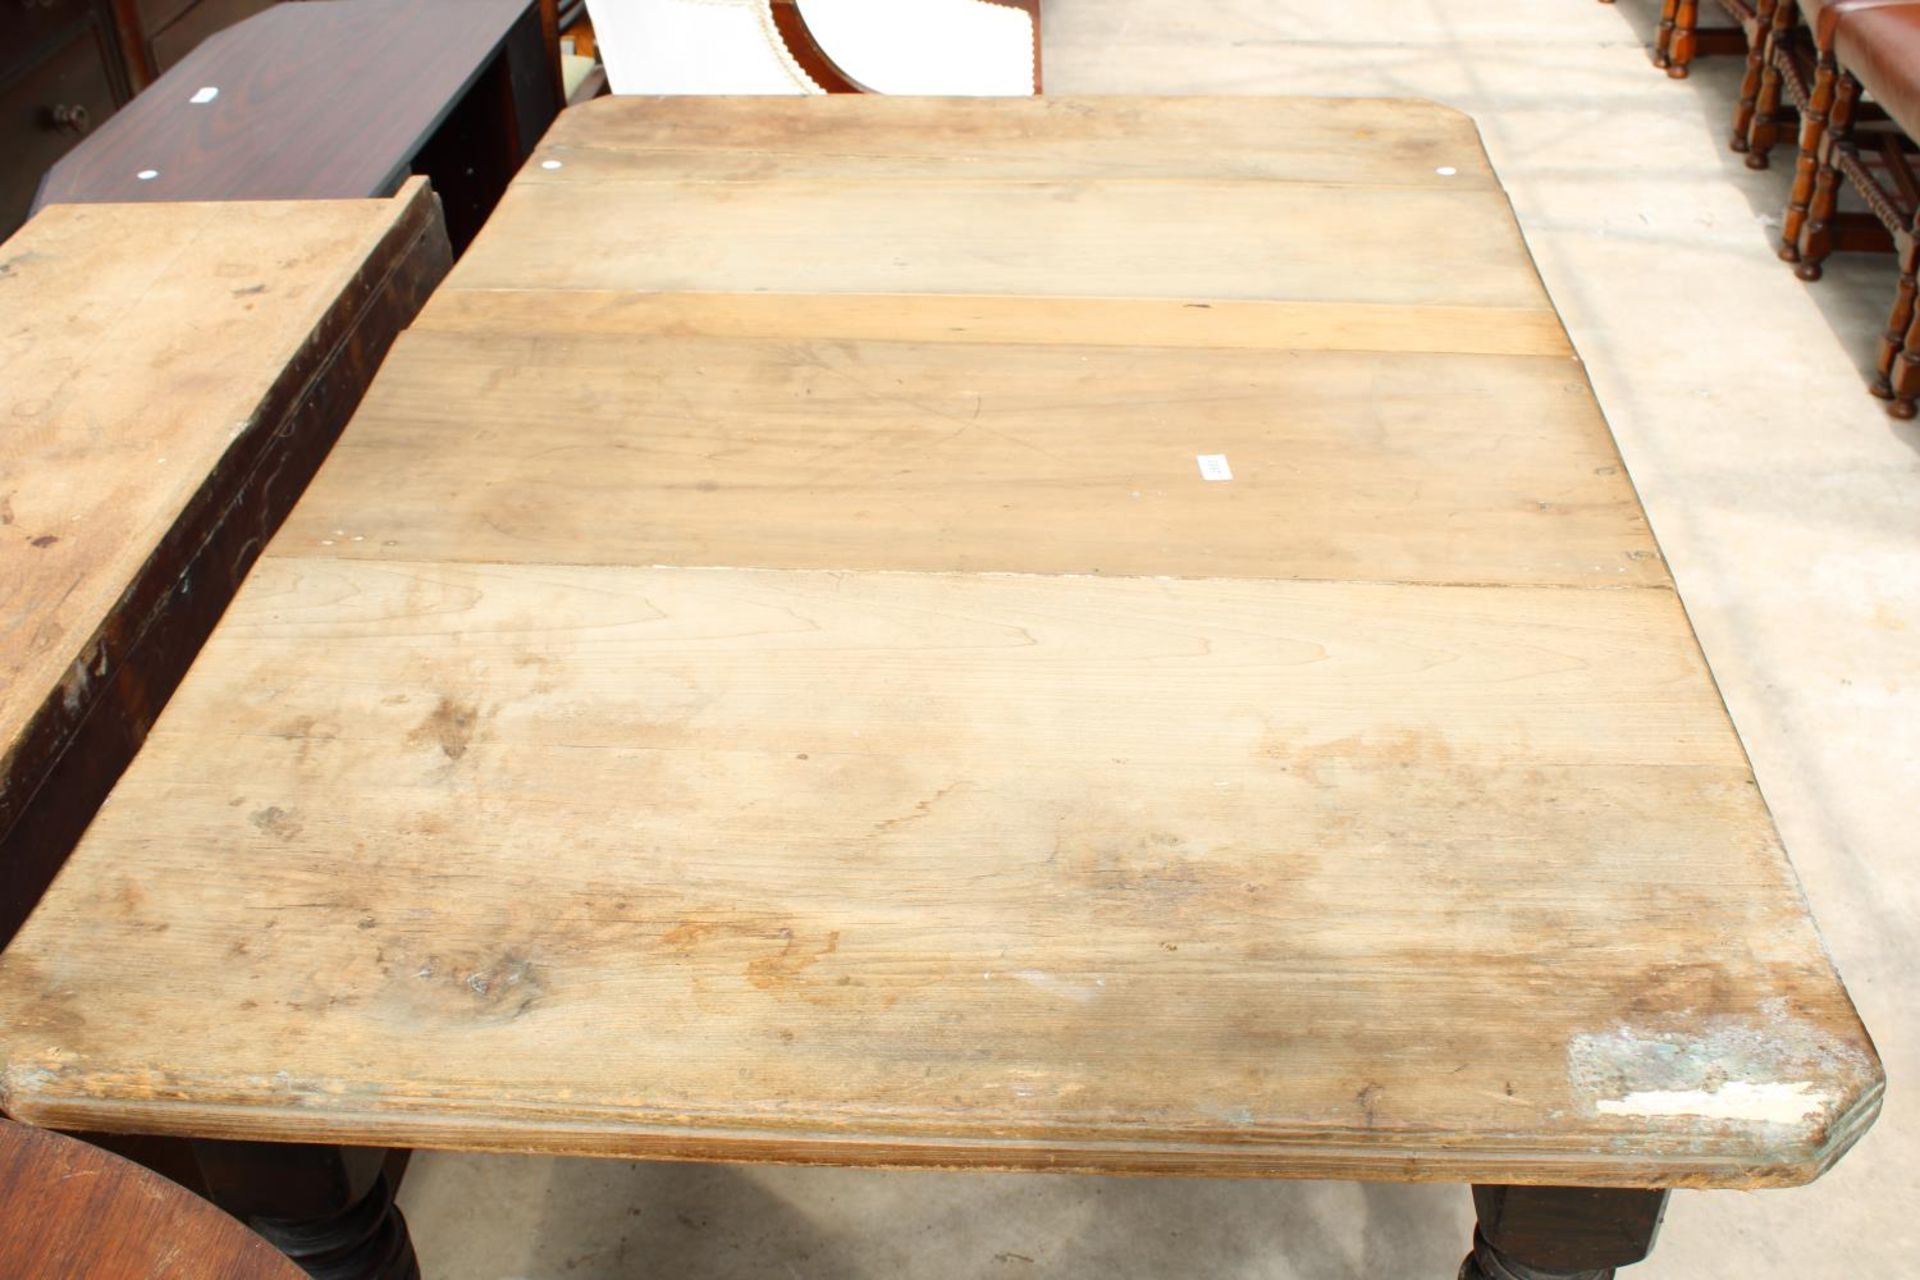 A LATE VICTORIAN SCRUB TOP WIND-OUT DINING TABLE WITH CANTED CORNERS ON TURNED AND FLUTED LEGS - Image 3 of 3